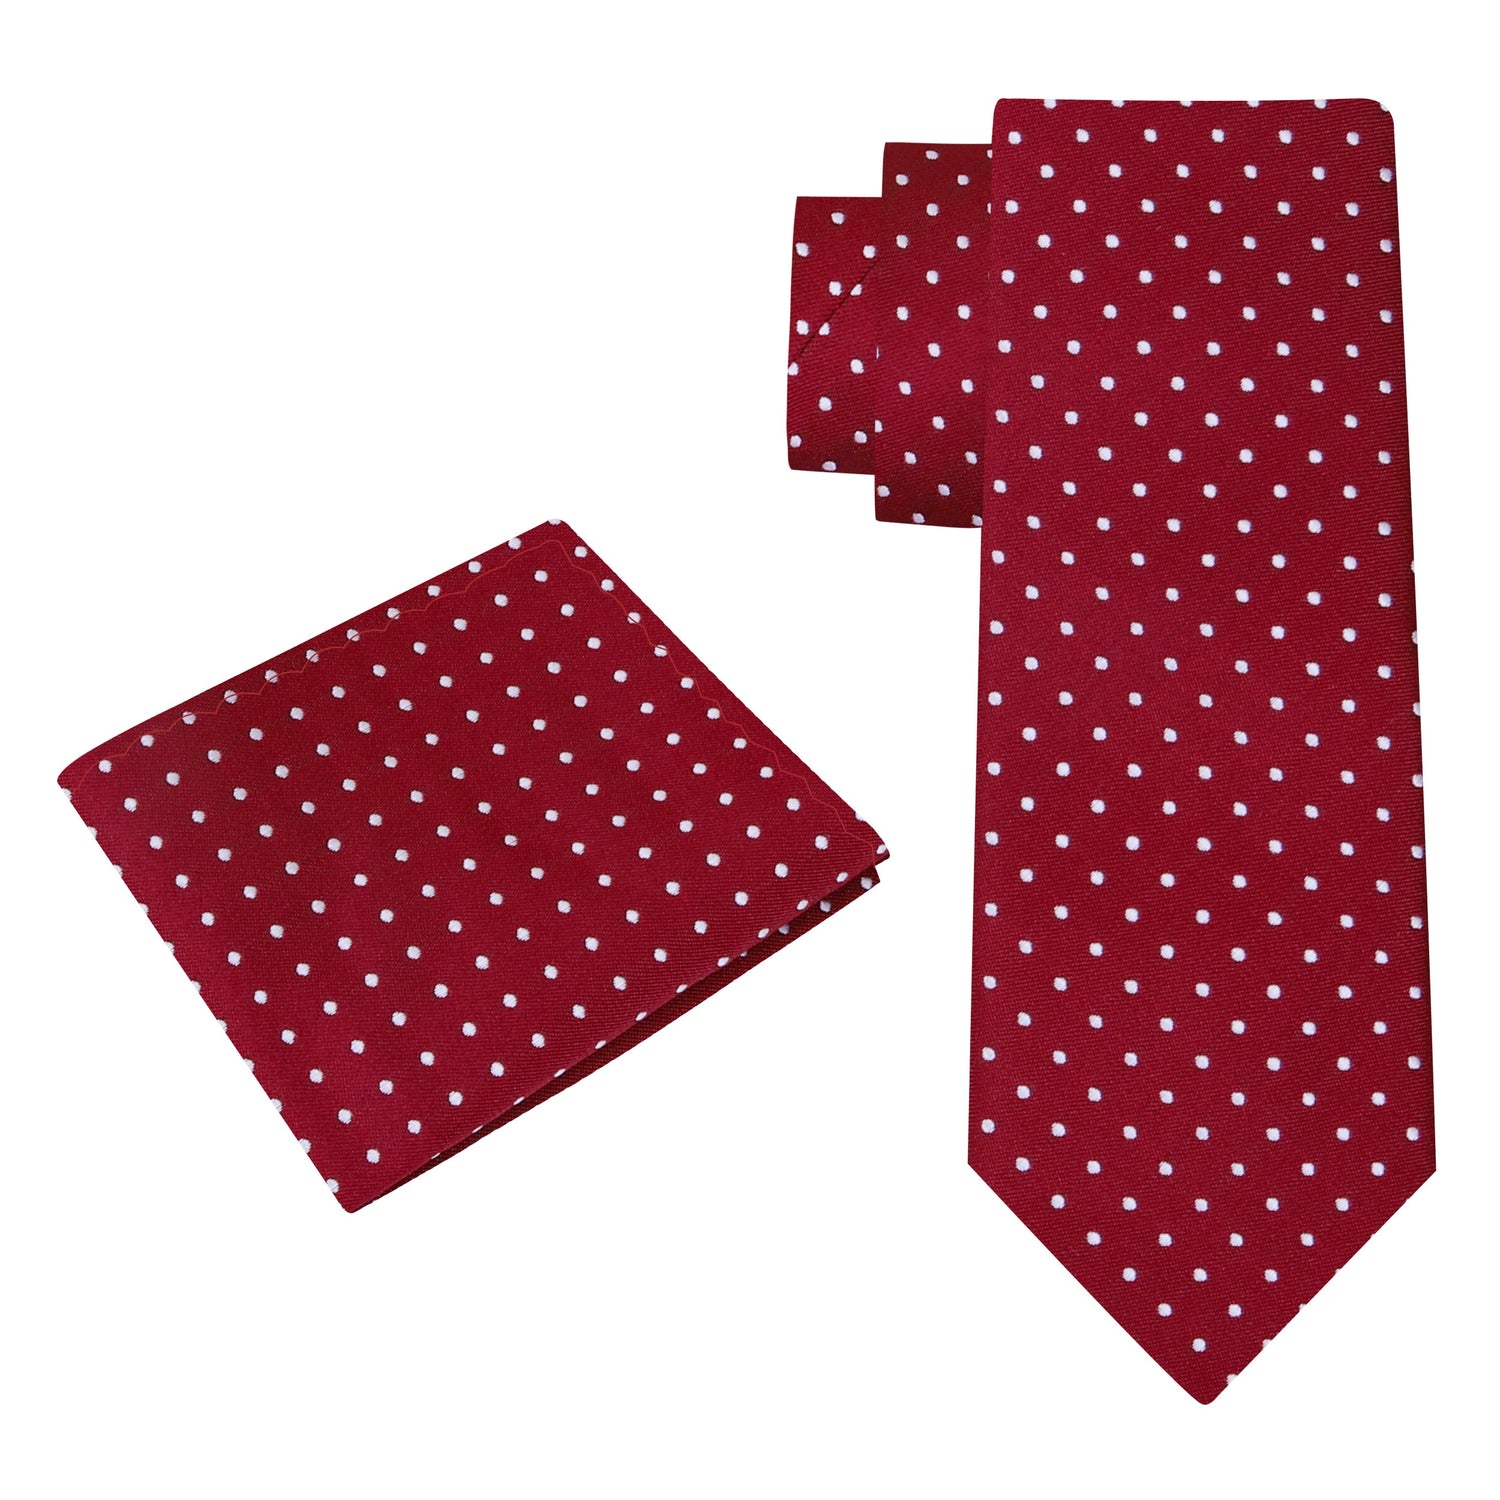 Alt View: Burgundy, White Polka Tie and Square